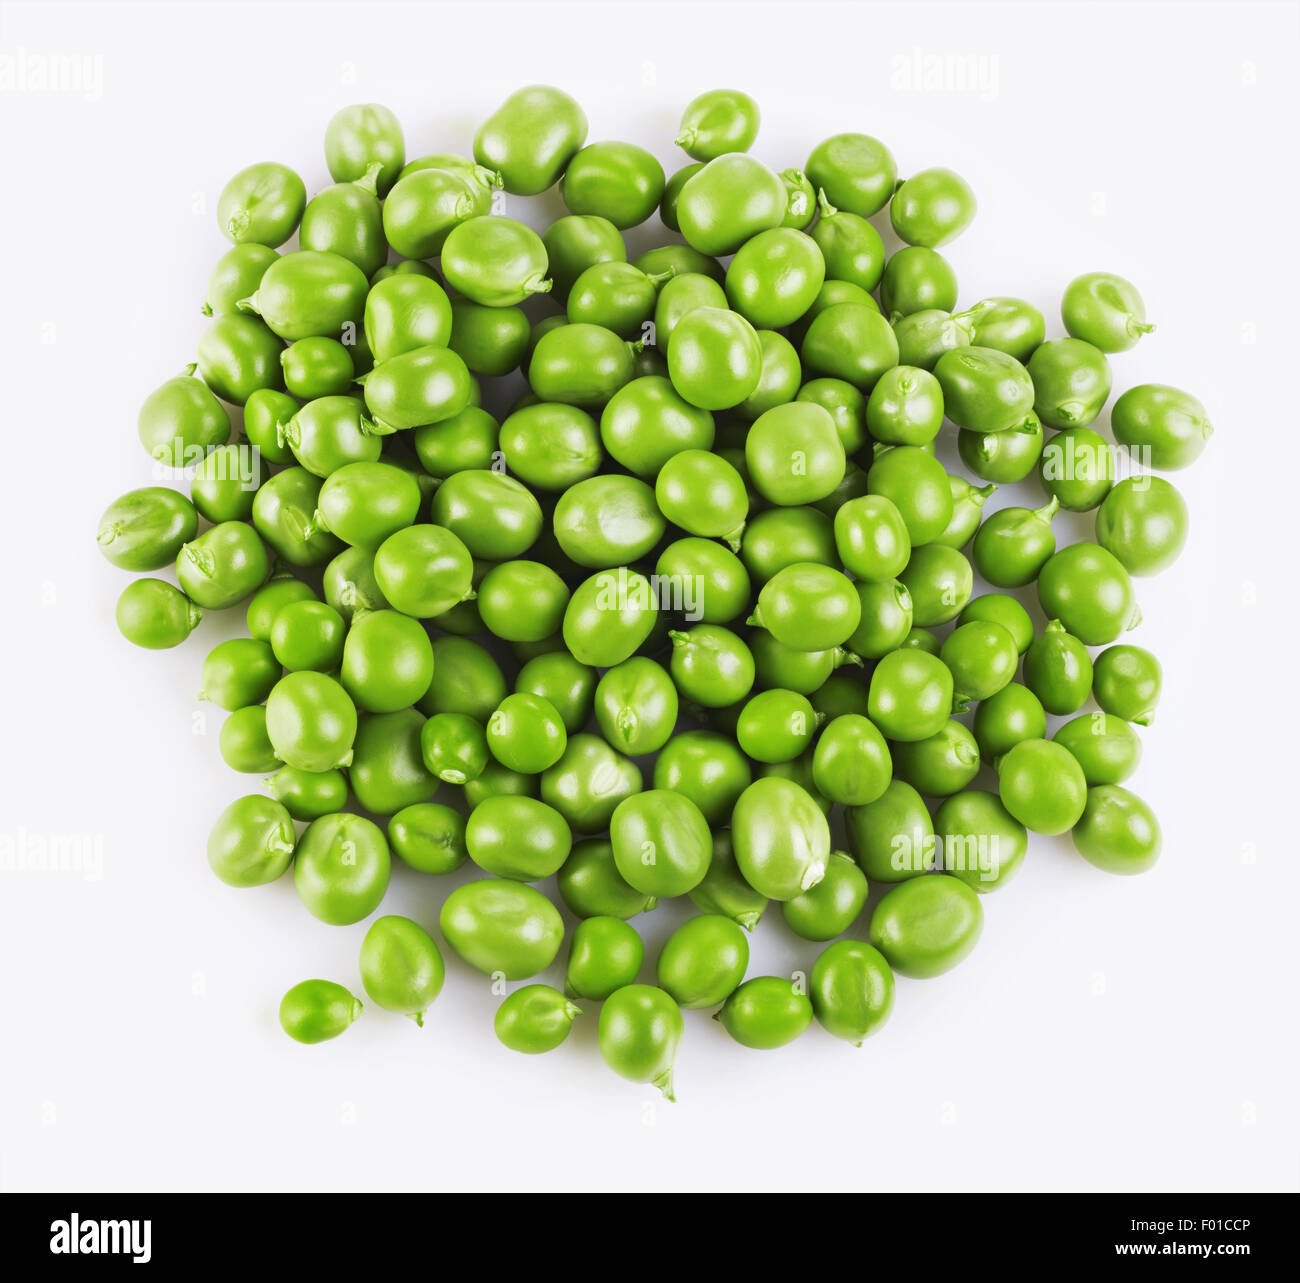 fresh green peas isolated on a white background Stock Photo